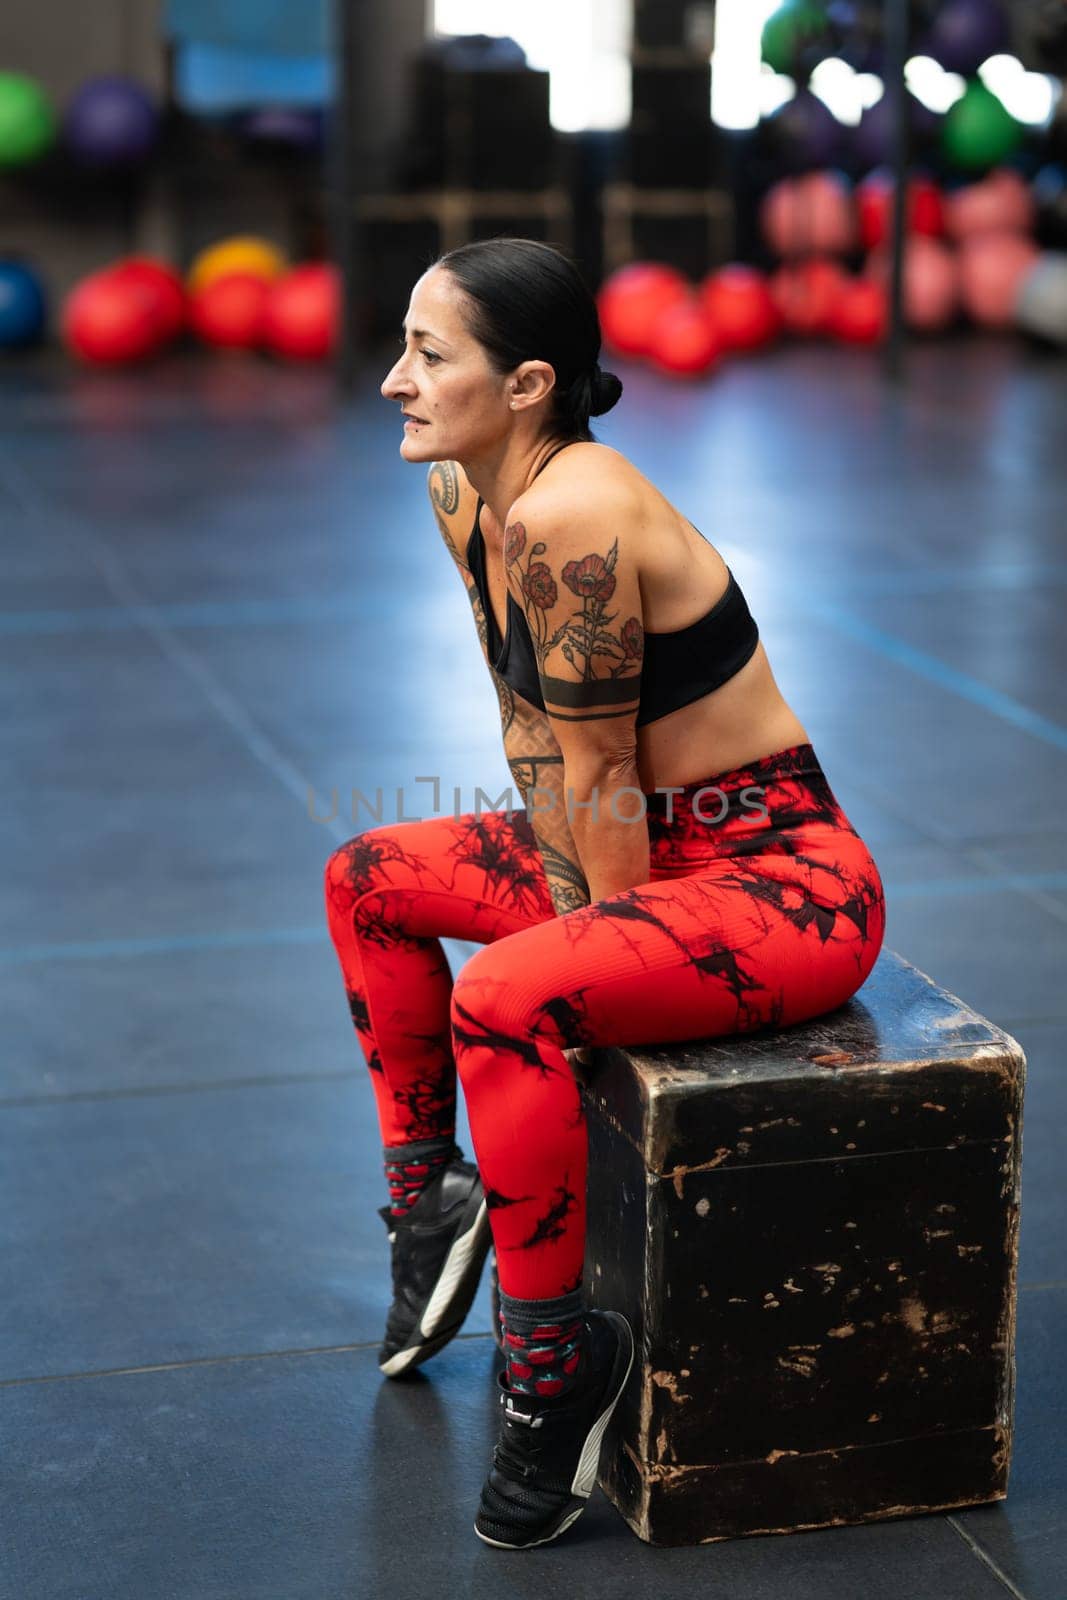 Mature athlete resting sitting on a box in a gym by javiindy